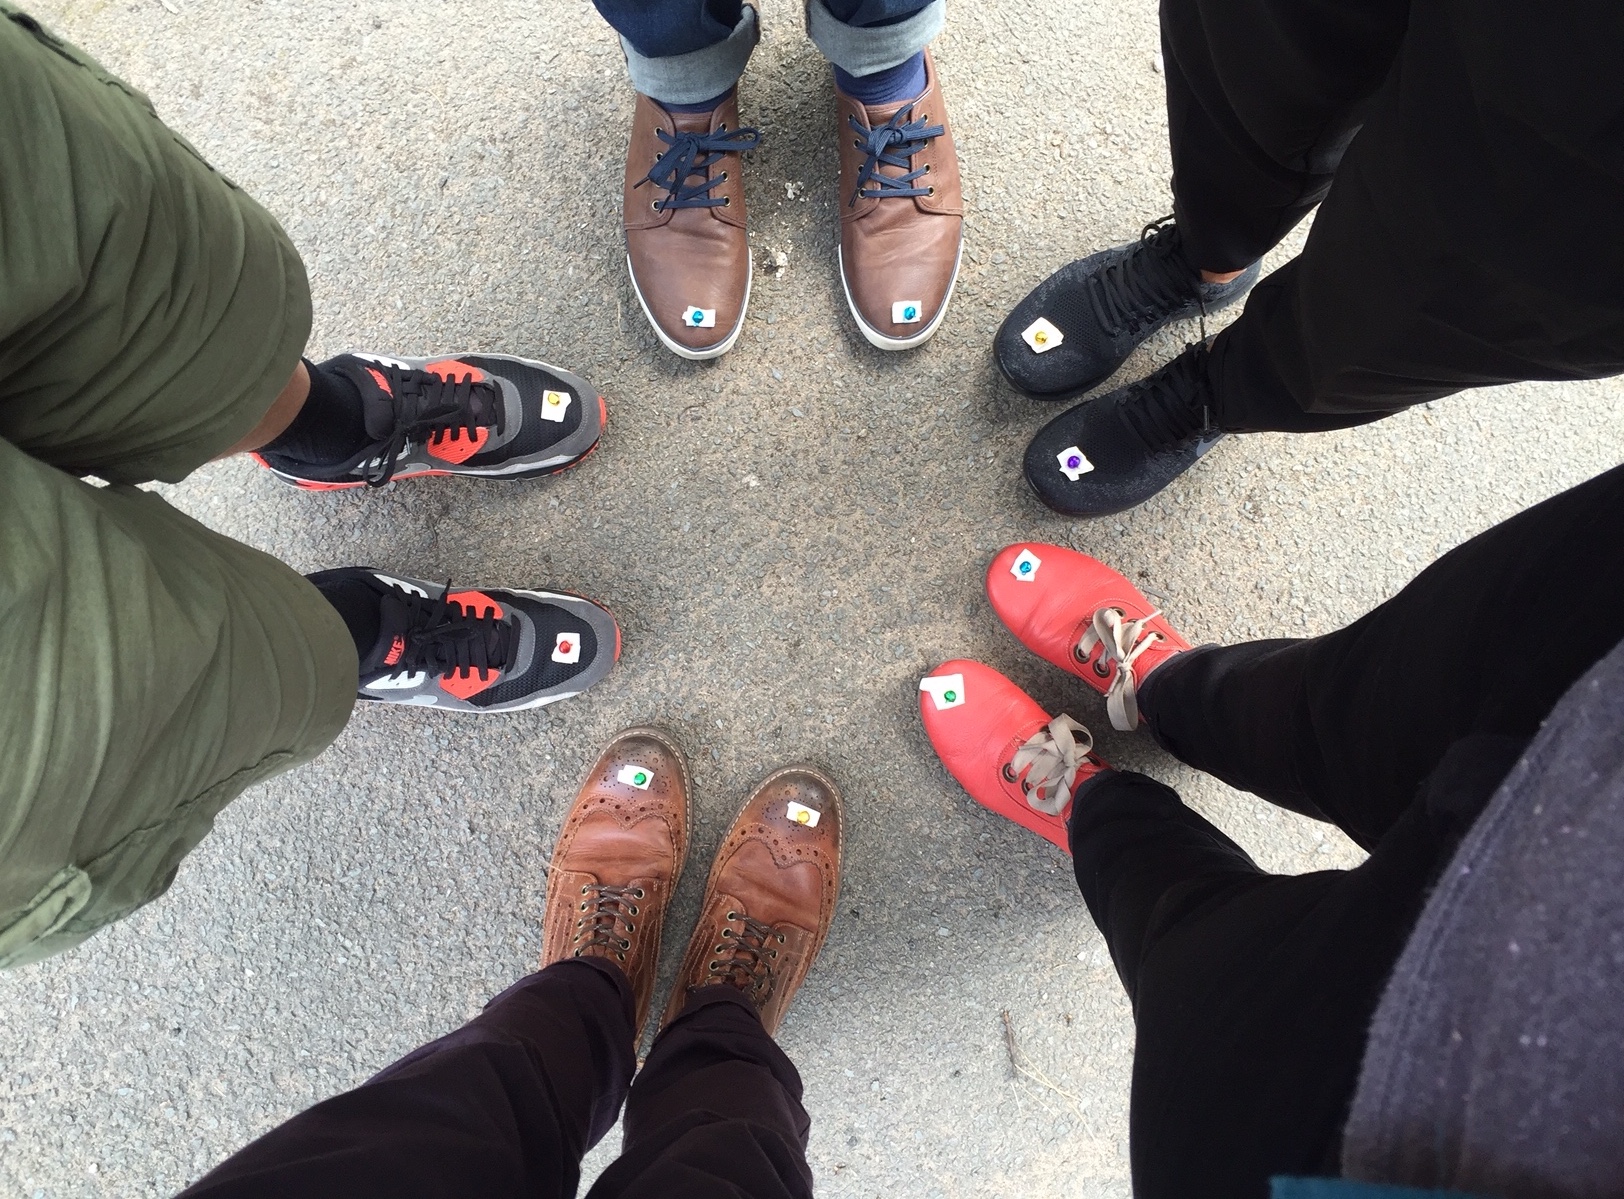 five peoples lower legs and feet, stood in a circle, with stickers on their shoes